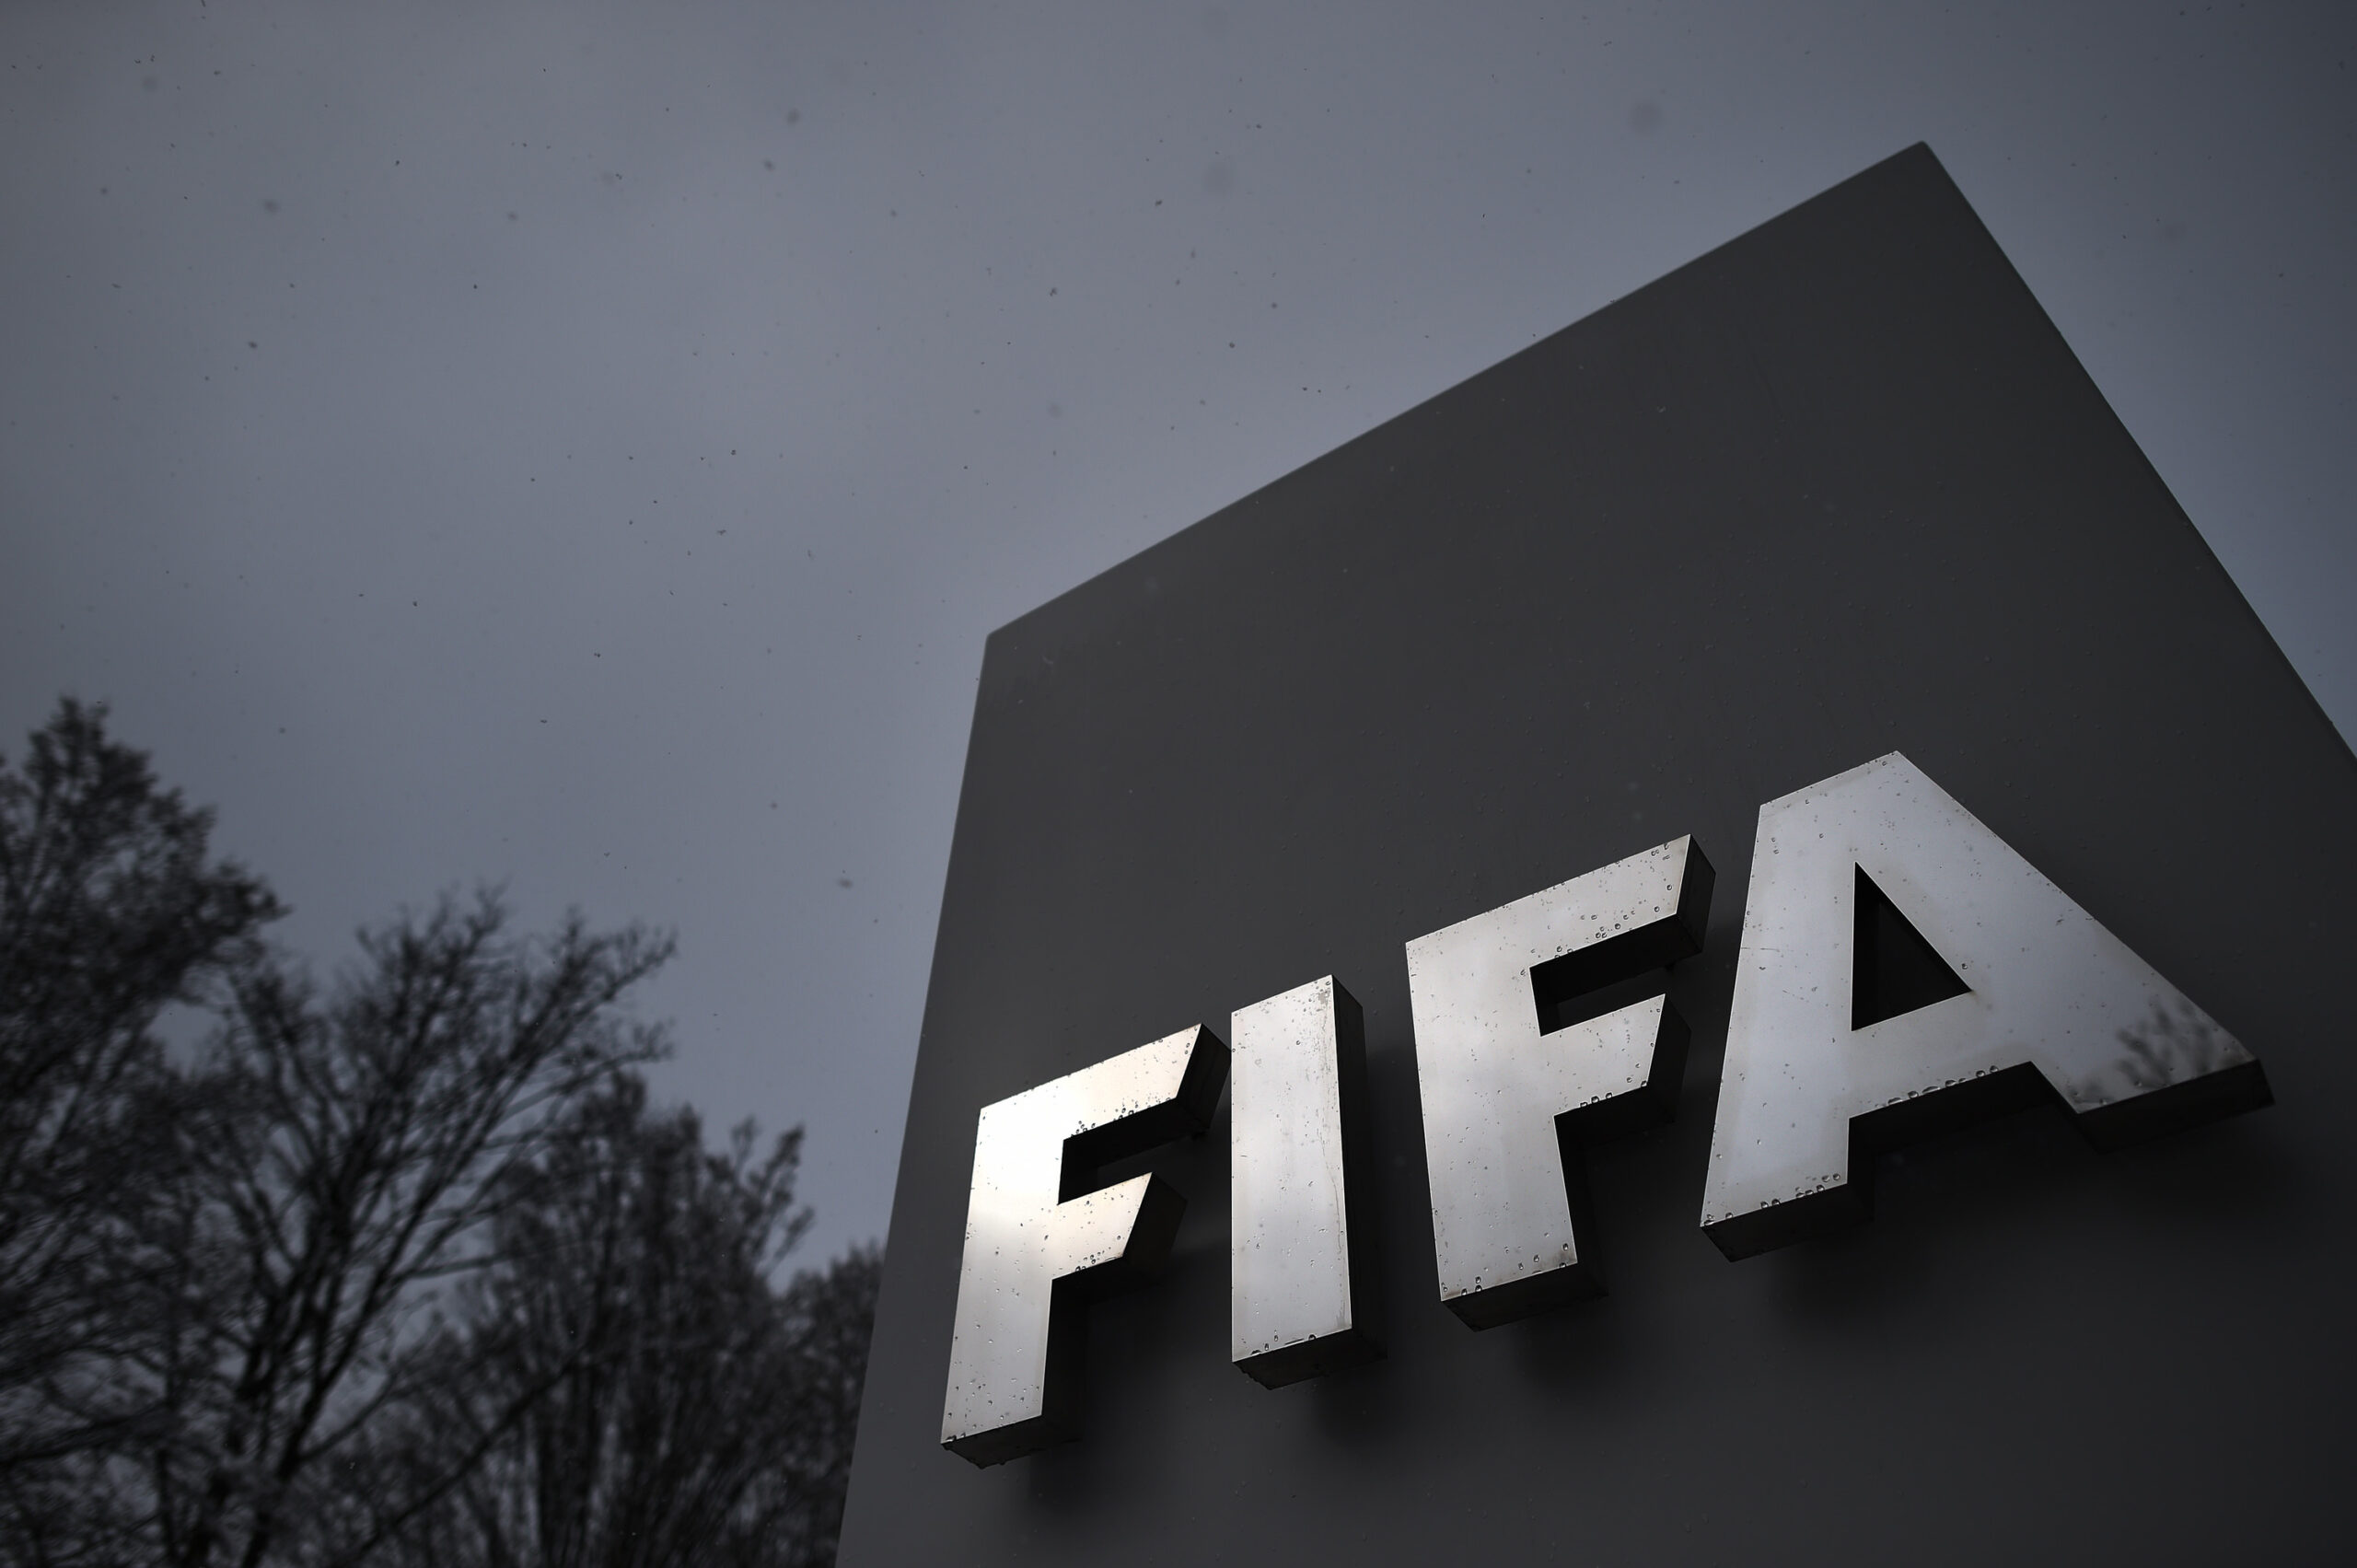 ZURICH, SWITZERLAND - FEBRUARY 25:  A FIFA logo seen near the headquarter Home of FIFA ahead of tomorrow's Extraordinary FIFA Congress to elect a new FIFA President at Hallenstadion on February 25, 2016 in Zurich, Switzerland.  (Photo by Matthias Hangst/Getty Images)